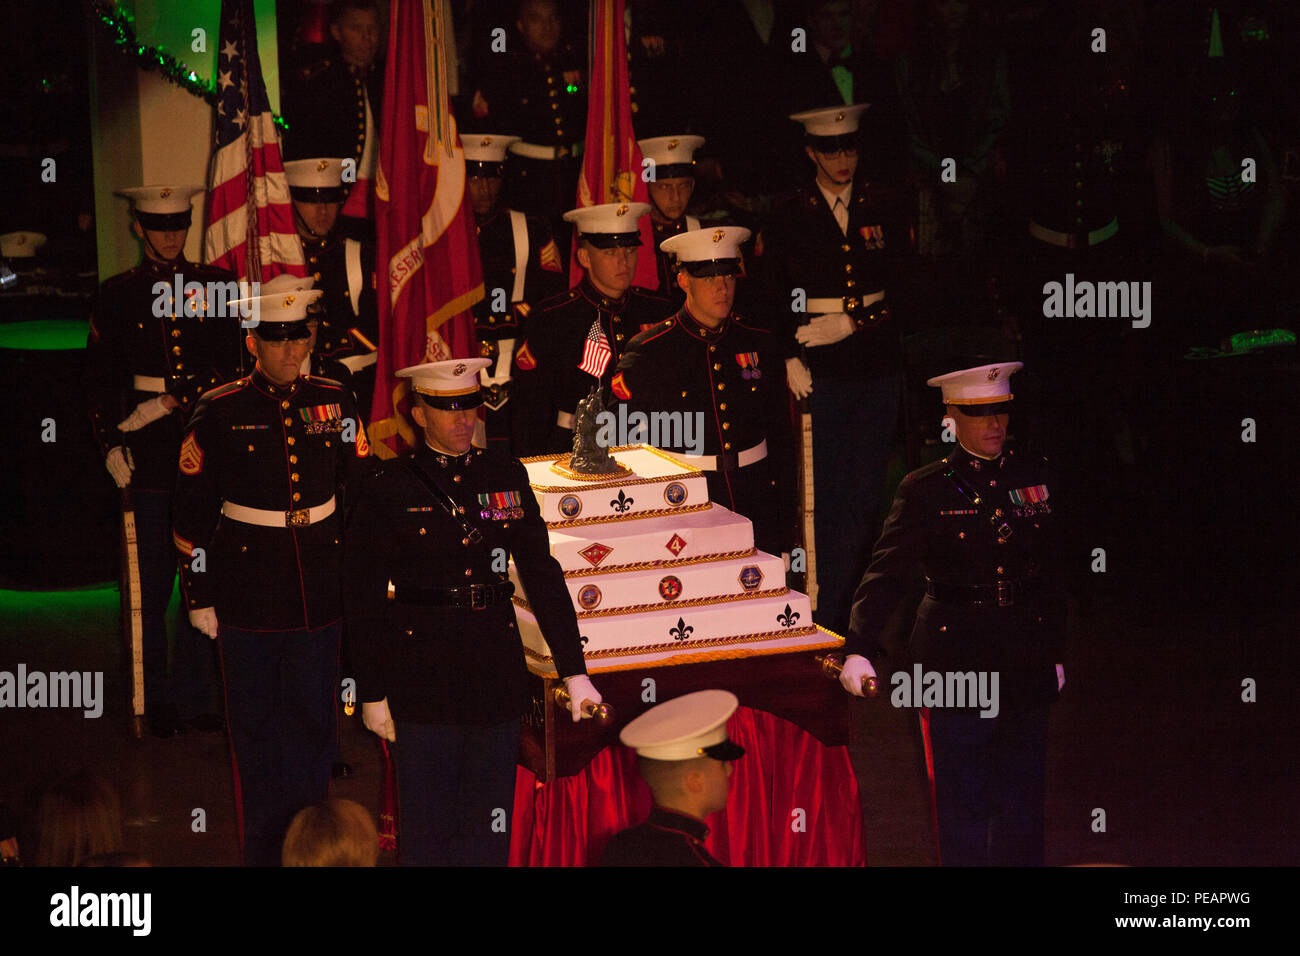 U.S. Marines with the Marine Forces Reserve and Marine Forces North, escort the birthday cake into position during the celebration of the 240th Marine Corps Birthday Ball at Mardi Gras World, New Orleans, La., Nov. 21, 2015. This year’s celebration honors those past, present, and future Marines throughout history and marks the 240th Marine Corps Birthday since its founding on Nov. 10, 1775. (U.S. Marine Corps photo by Kimberly Aguirre/Released) Stock Photo